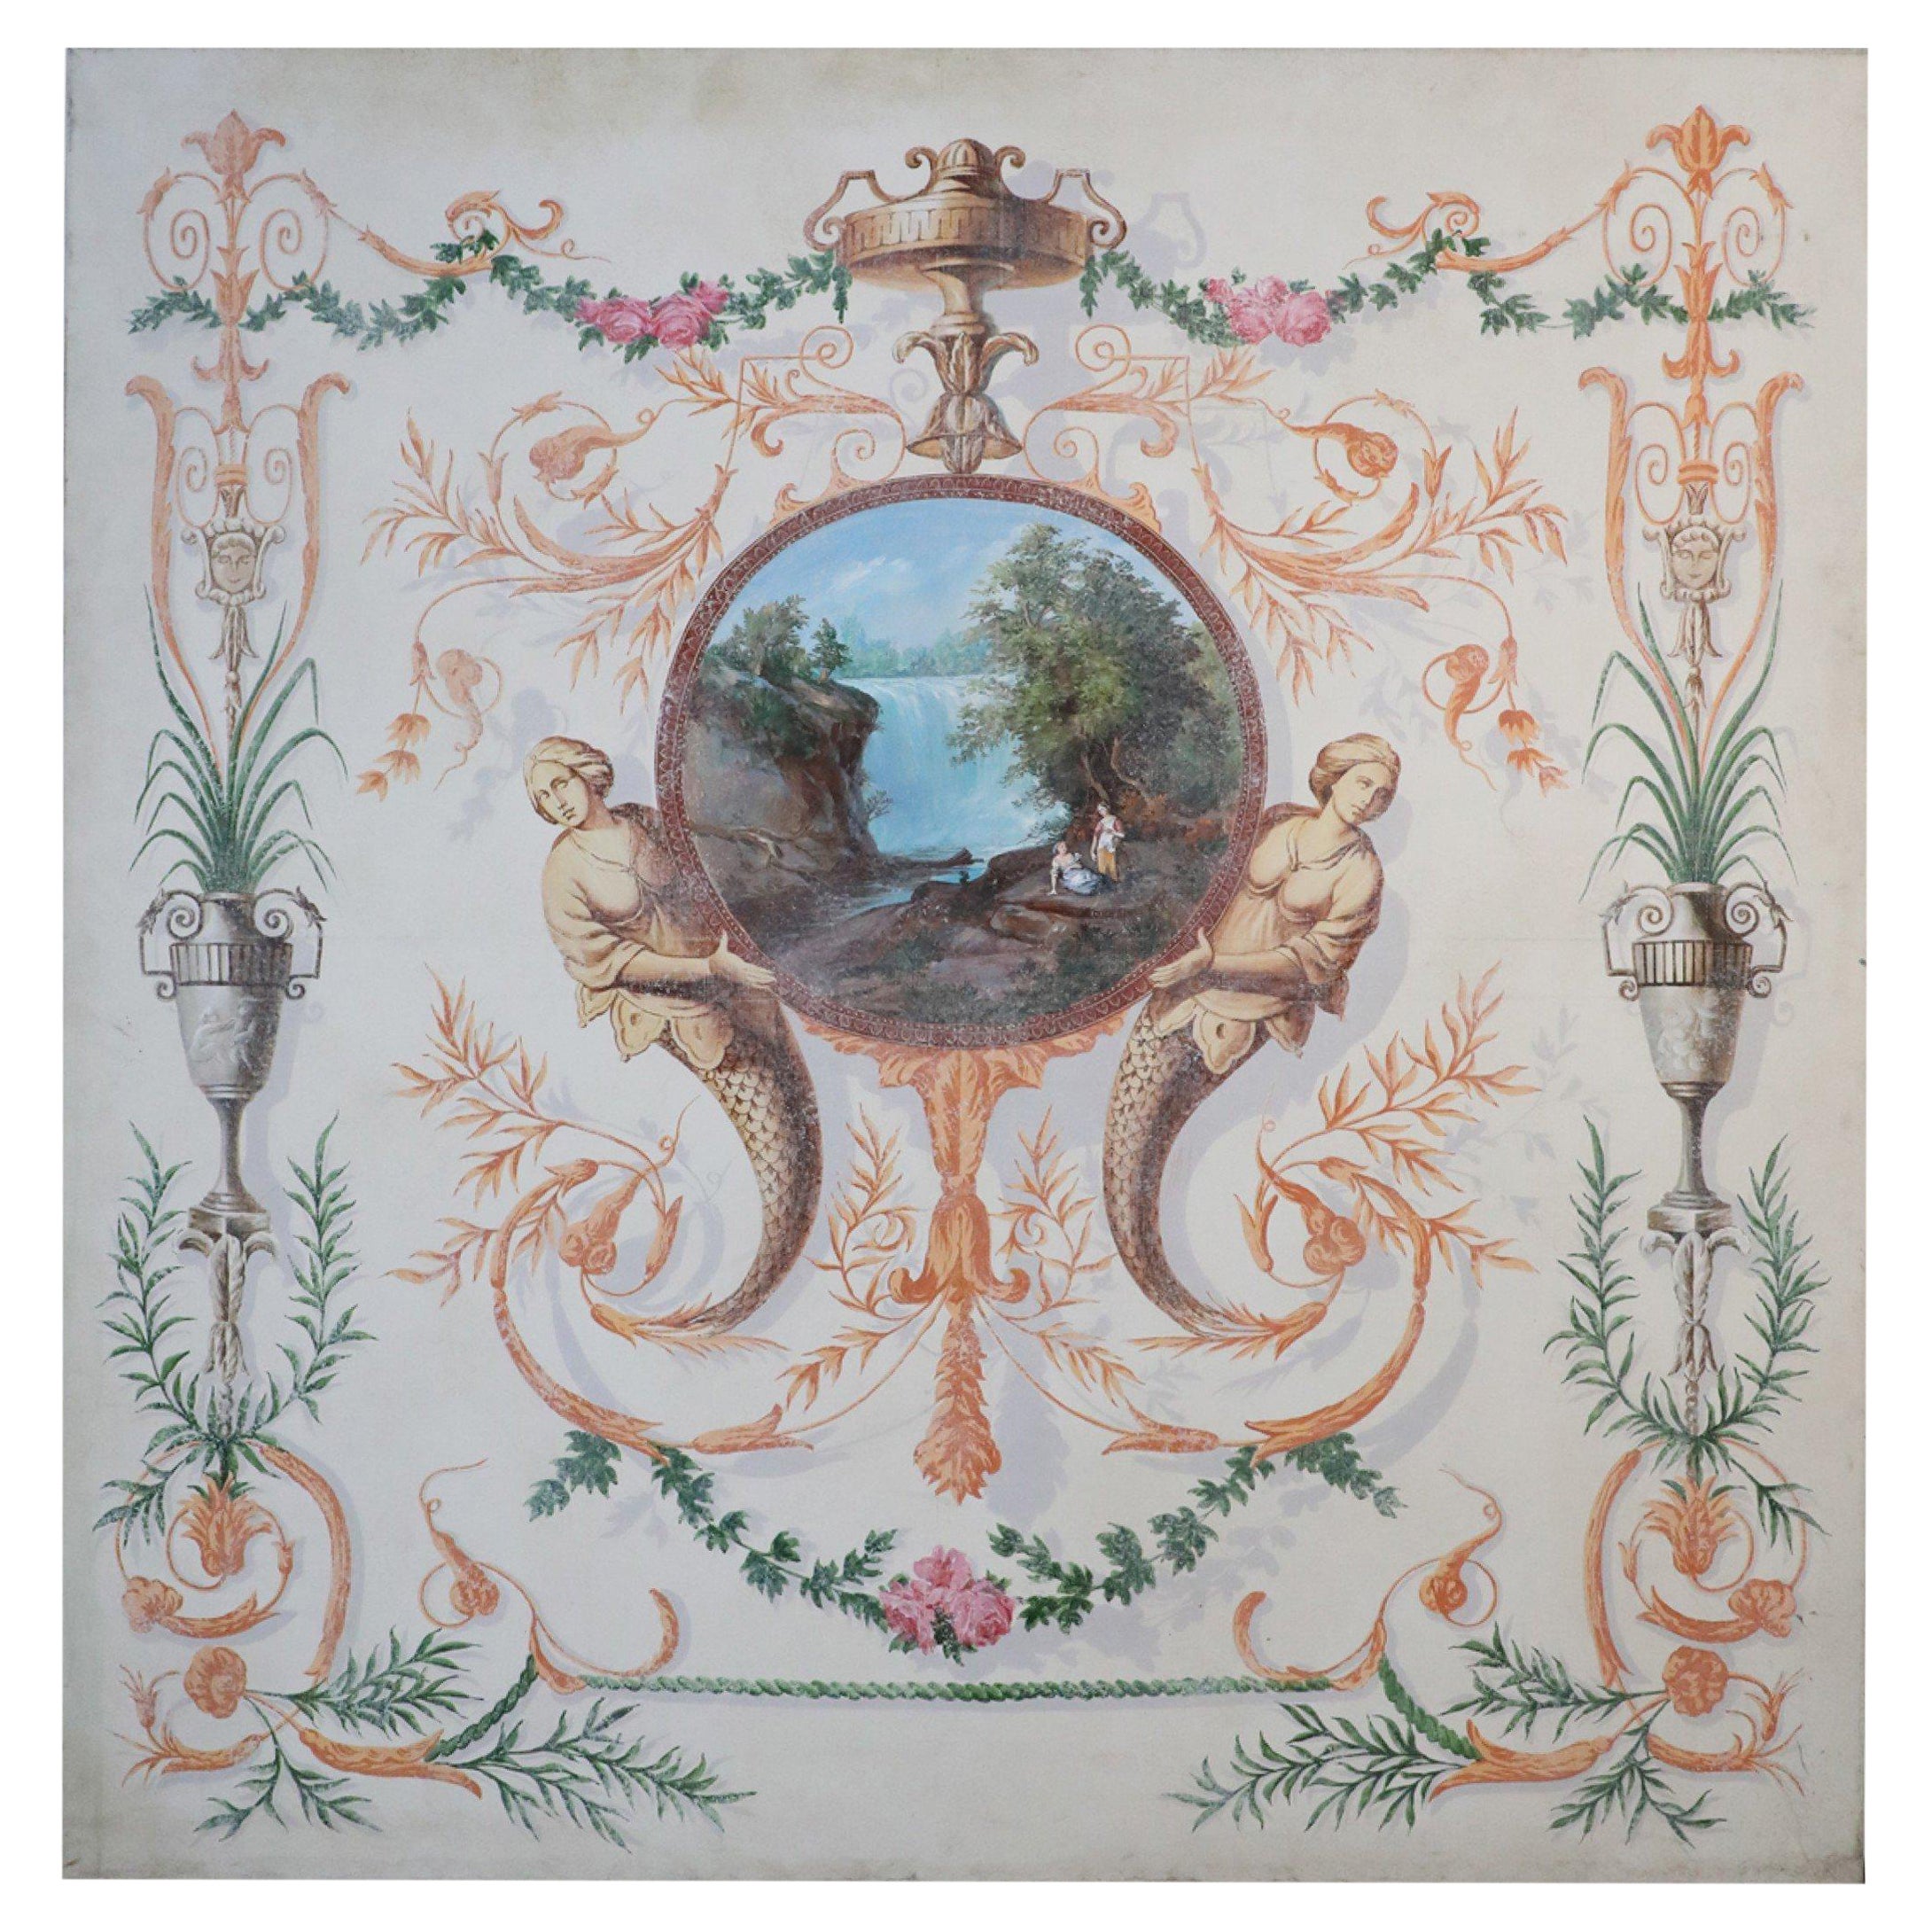 Neoclassical Landscape Painting with Floral and Mermaid Ornamentation